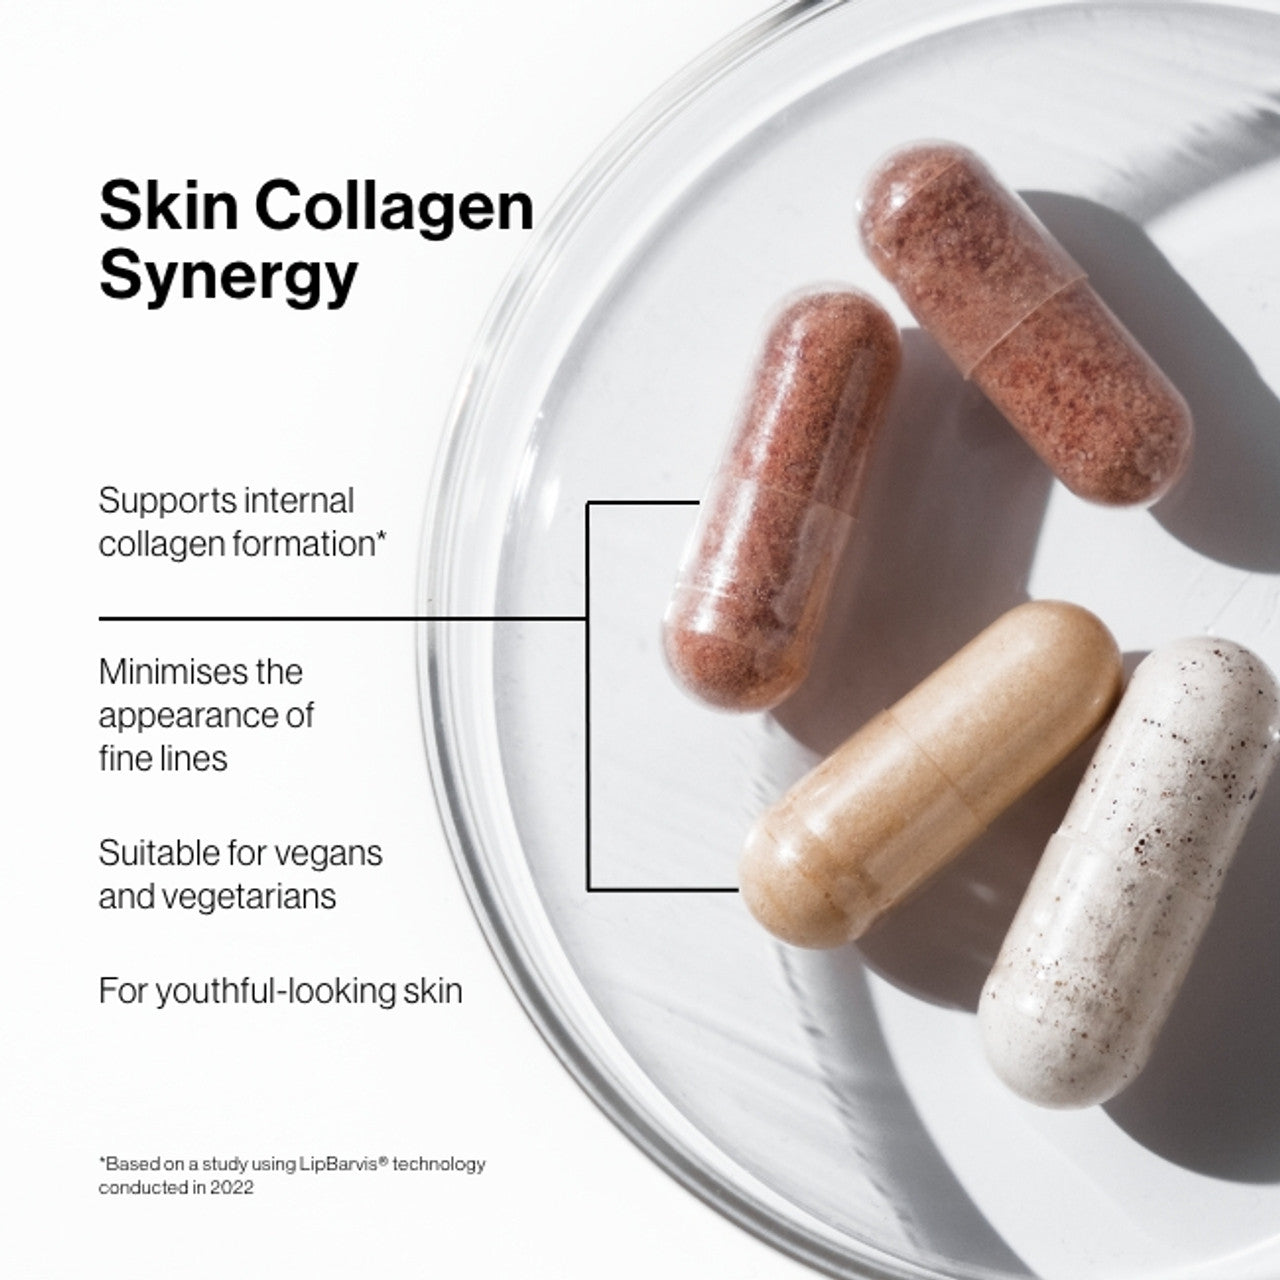 Advanced Nutrition Programme - Skin Collagen Synergy